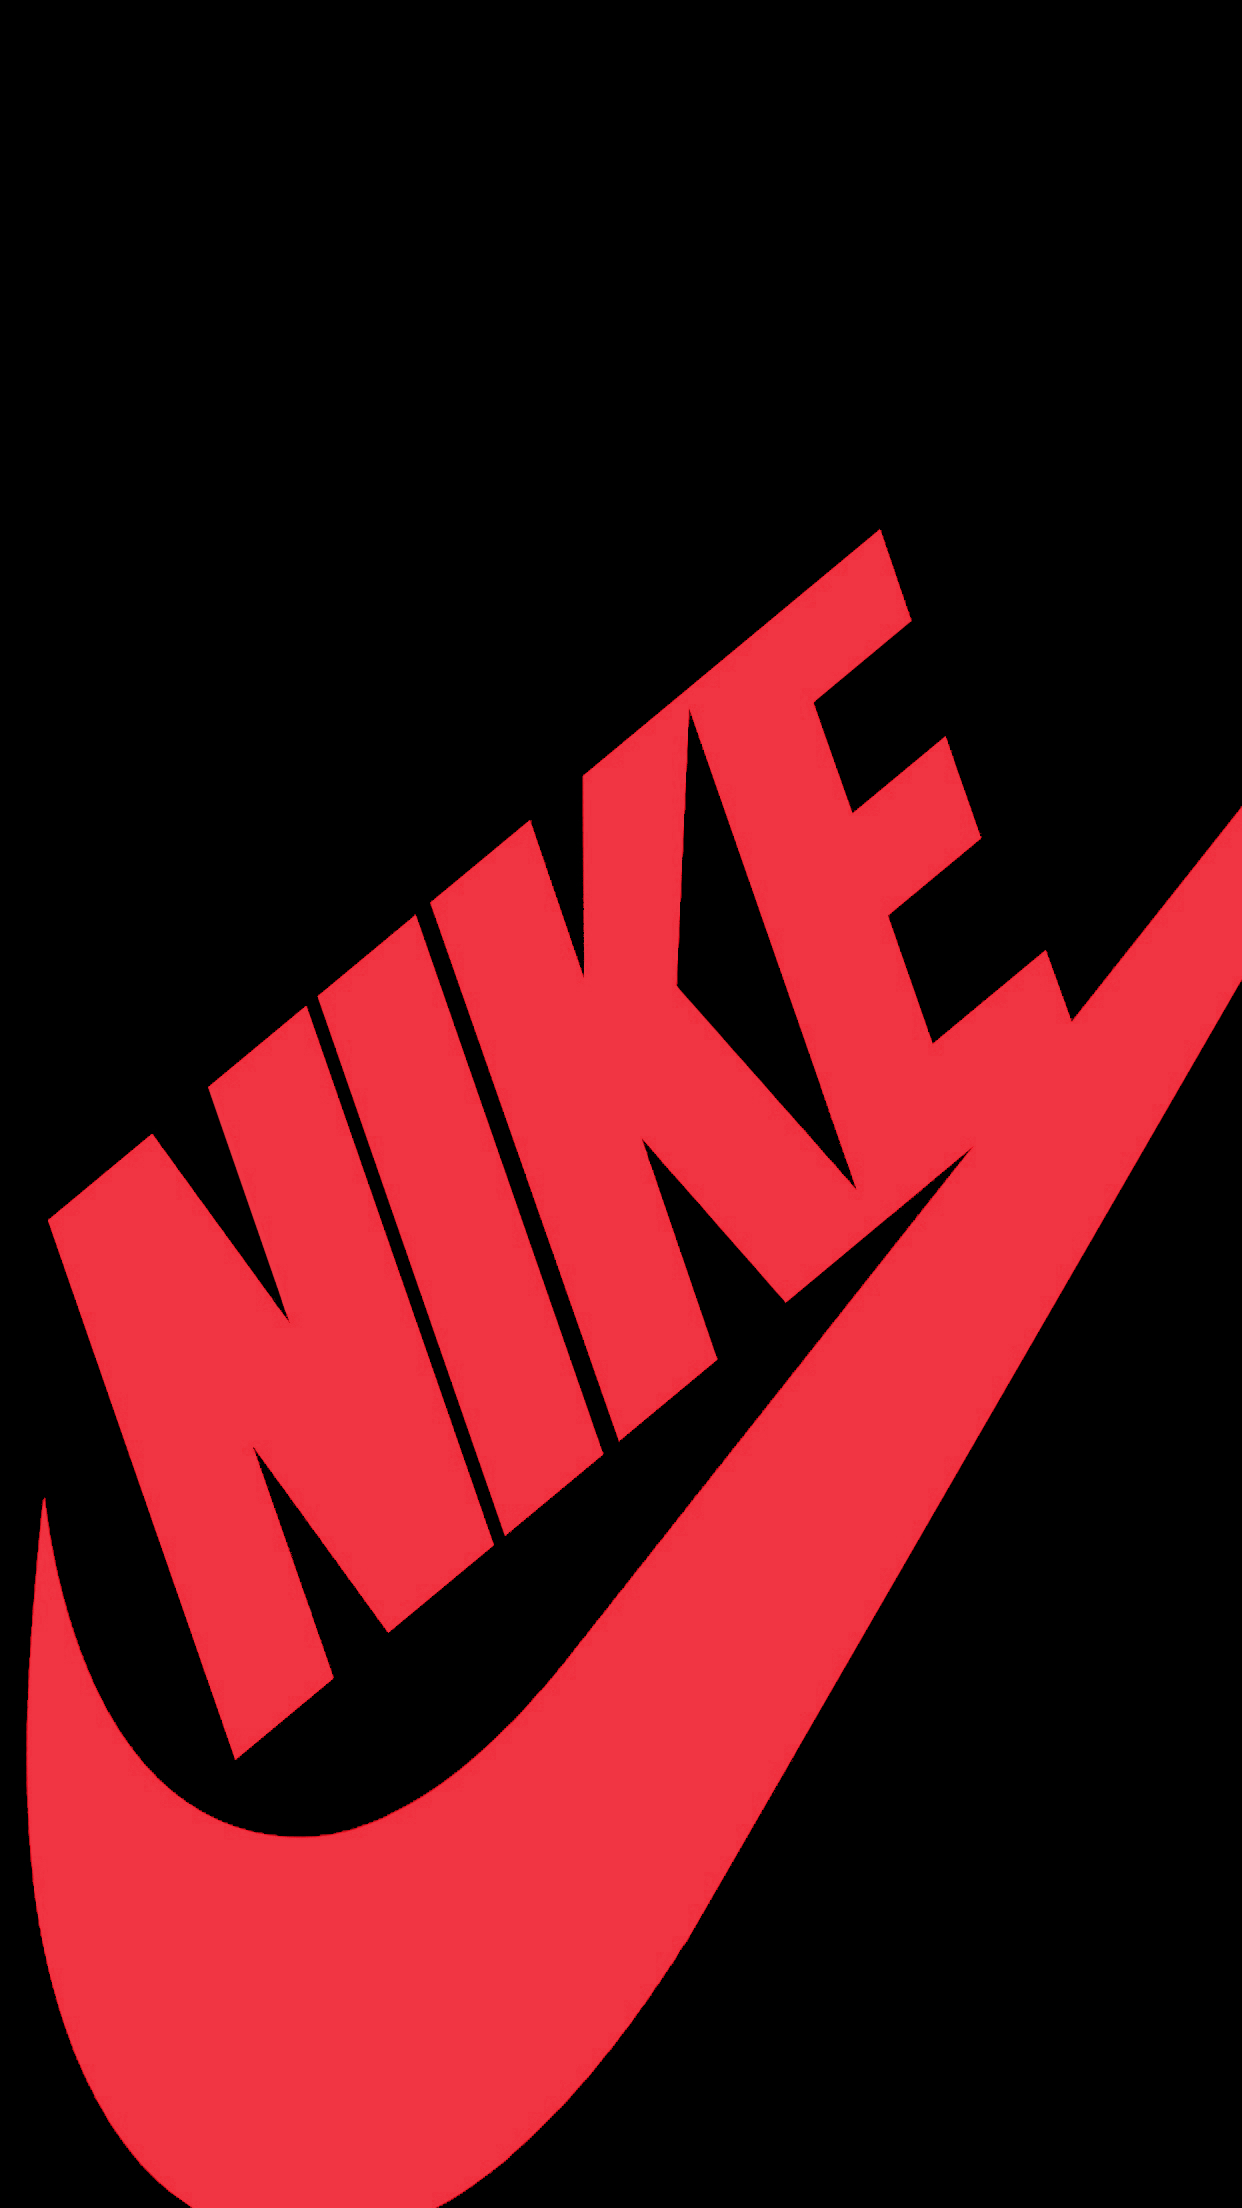 Nike Check iPhone Wallpaper resolution 1242x2208